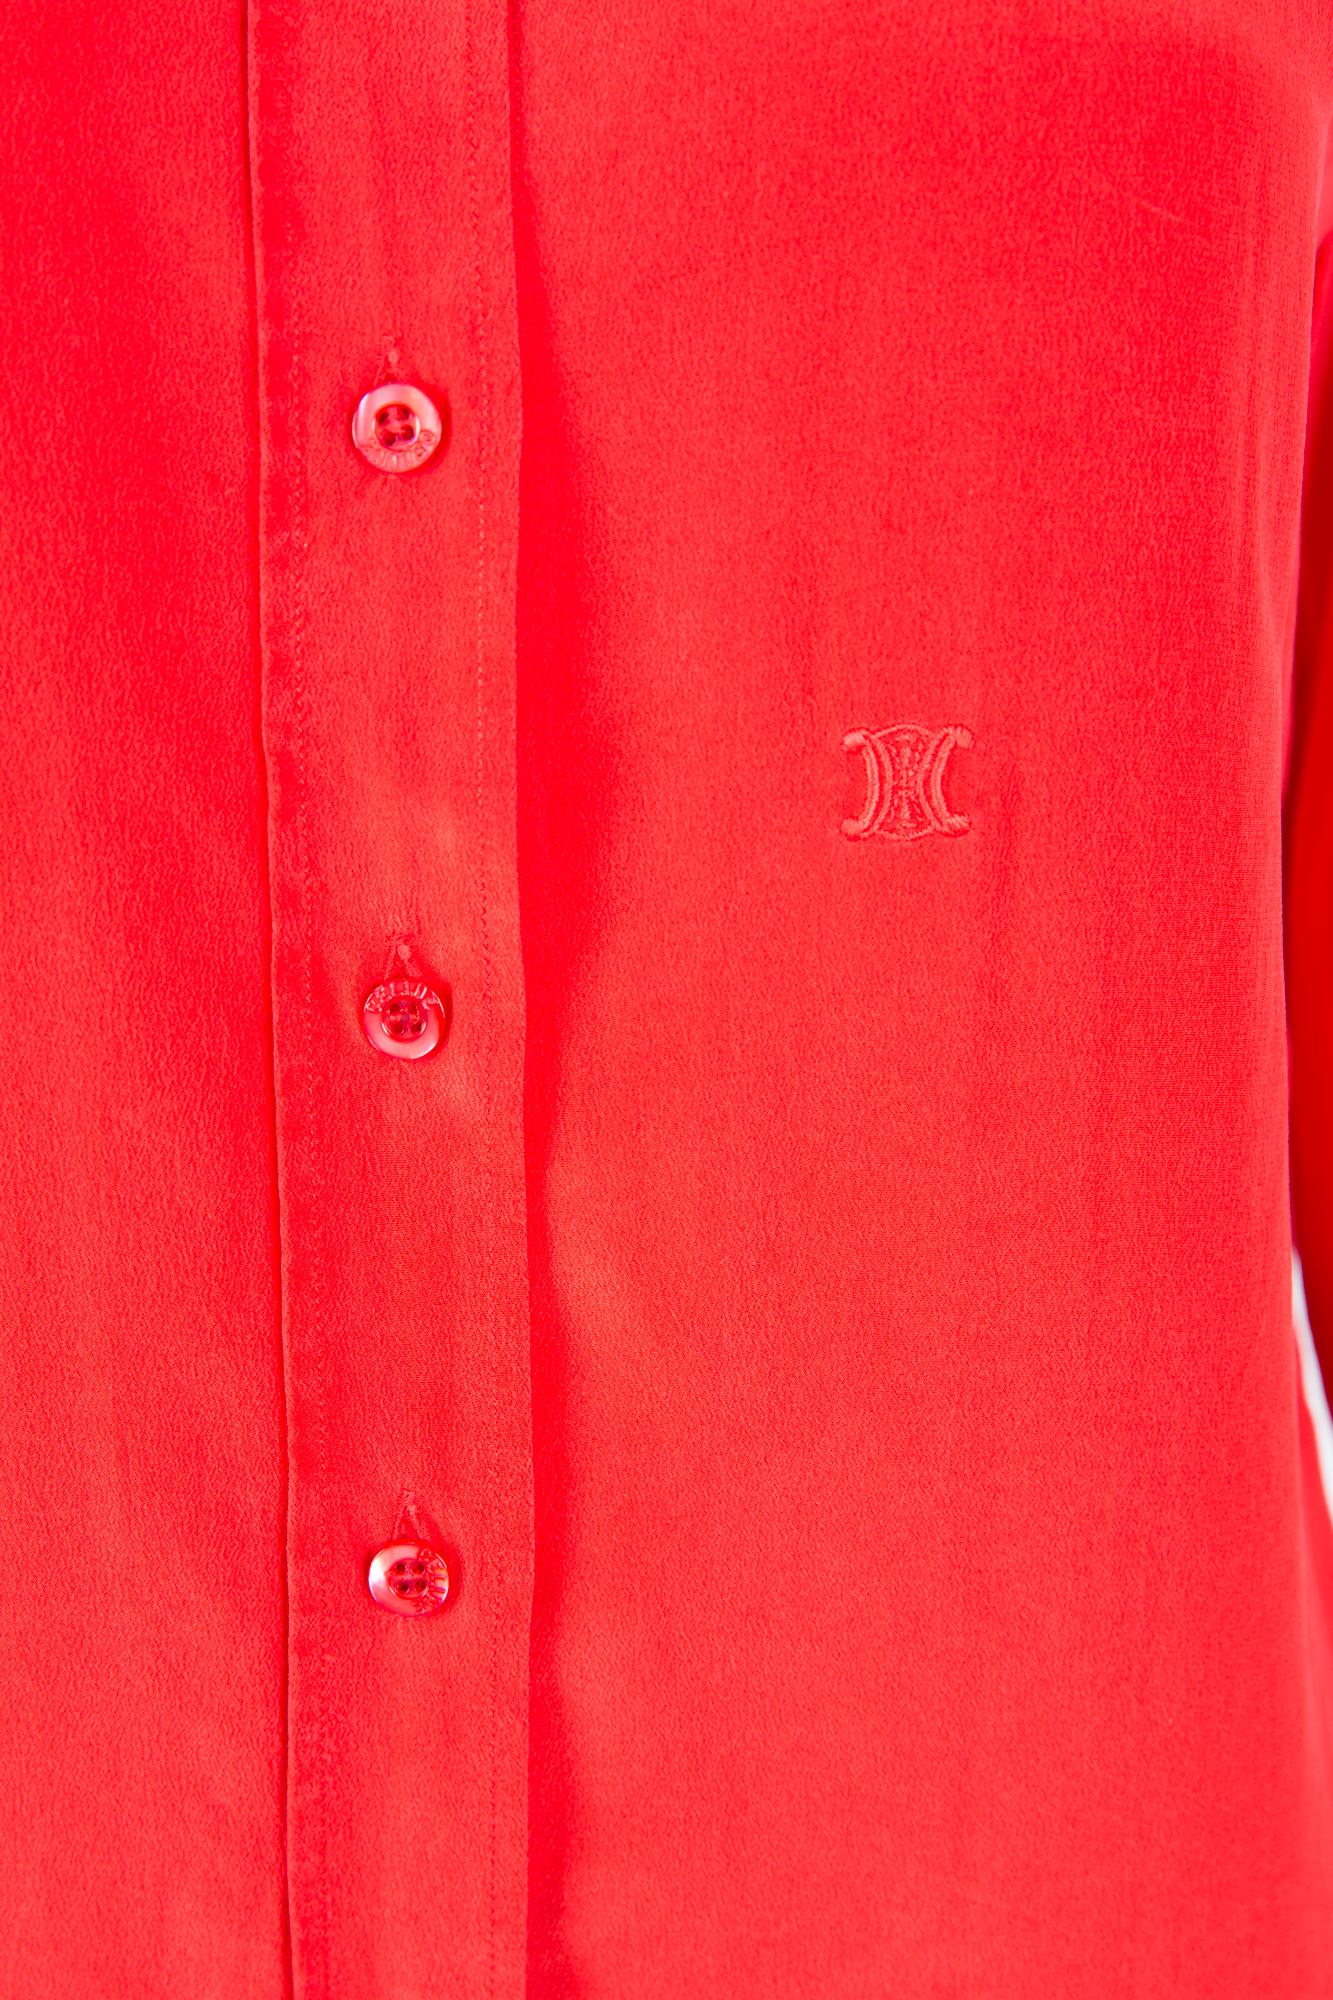 1970s Celine red silk shirt featuring featuring a shirt collar, with a separated tie, a Celine logo on the bust, and logo Celine buttons.
100% silk
Estimated size 38fr/US6 /UK10
We guarantee you will receive this gorgeous item as described and